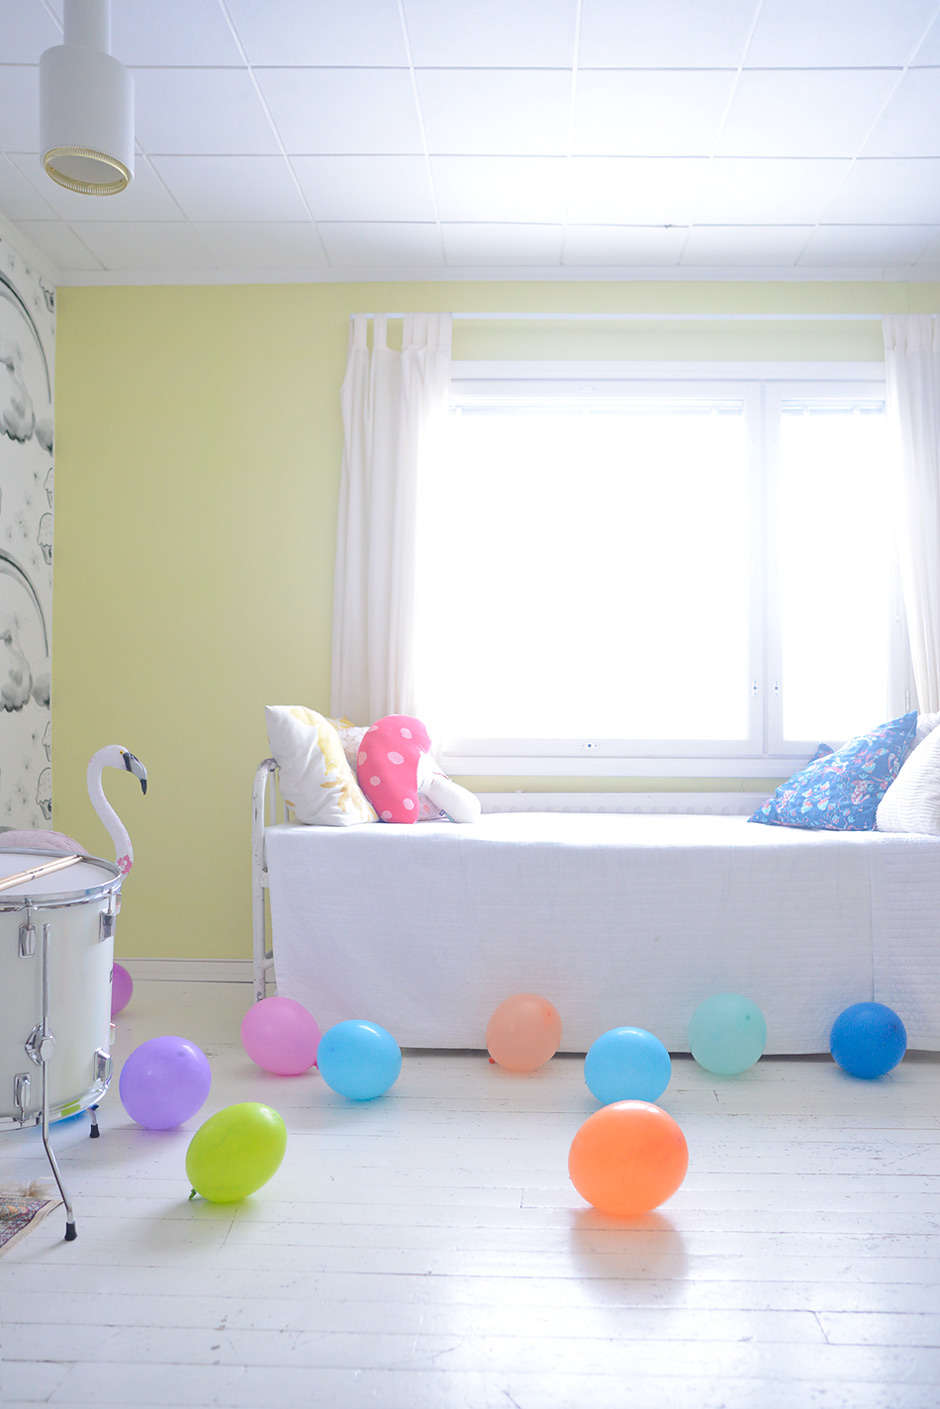 Balloons in a light filled room